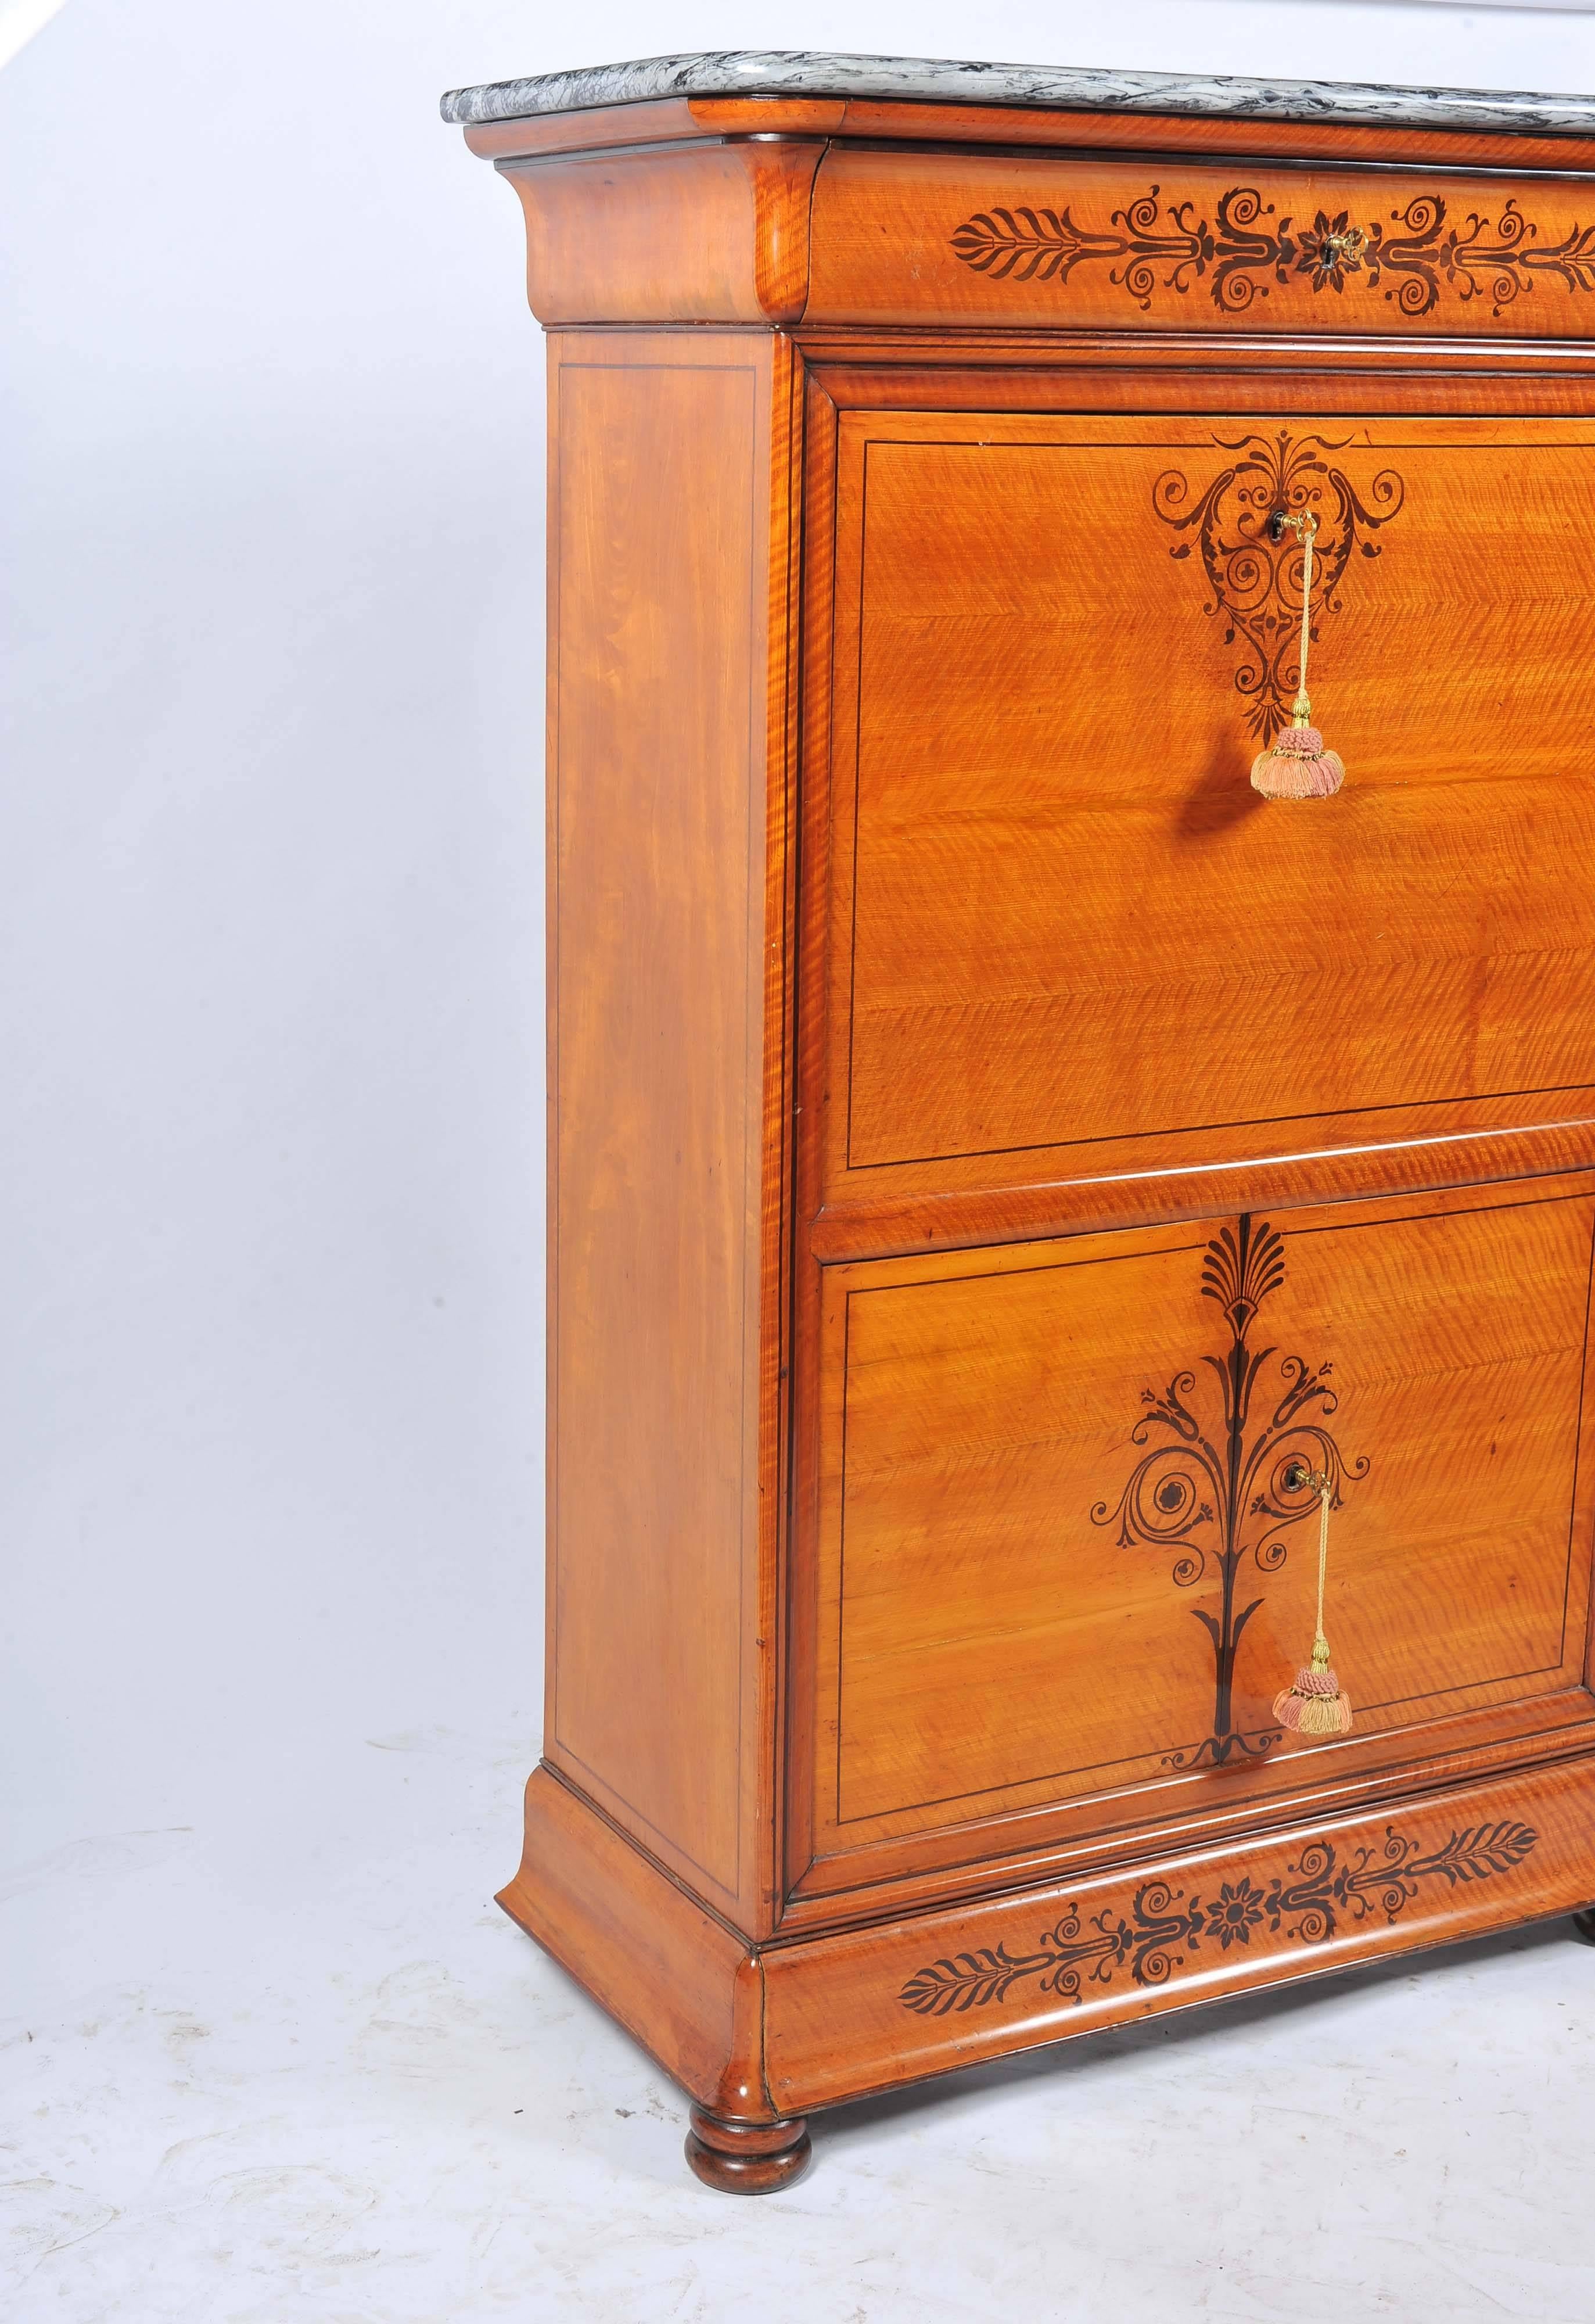 A very good quality French satin birch and rosewood inlaid secretaire abbatant. Having a marble top, a fall front opening to reveal a compartmented interior with drawers, mirrors and an inset leather writing tablet, cupboard doors beneath with a